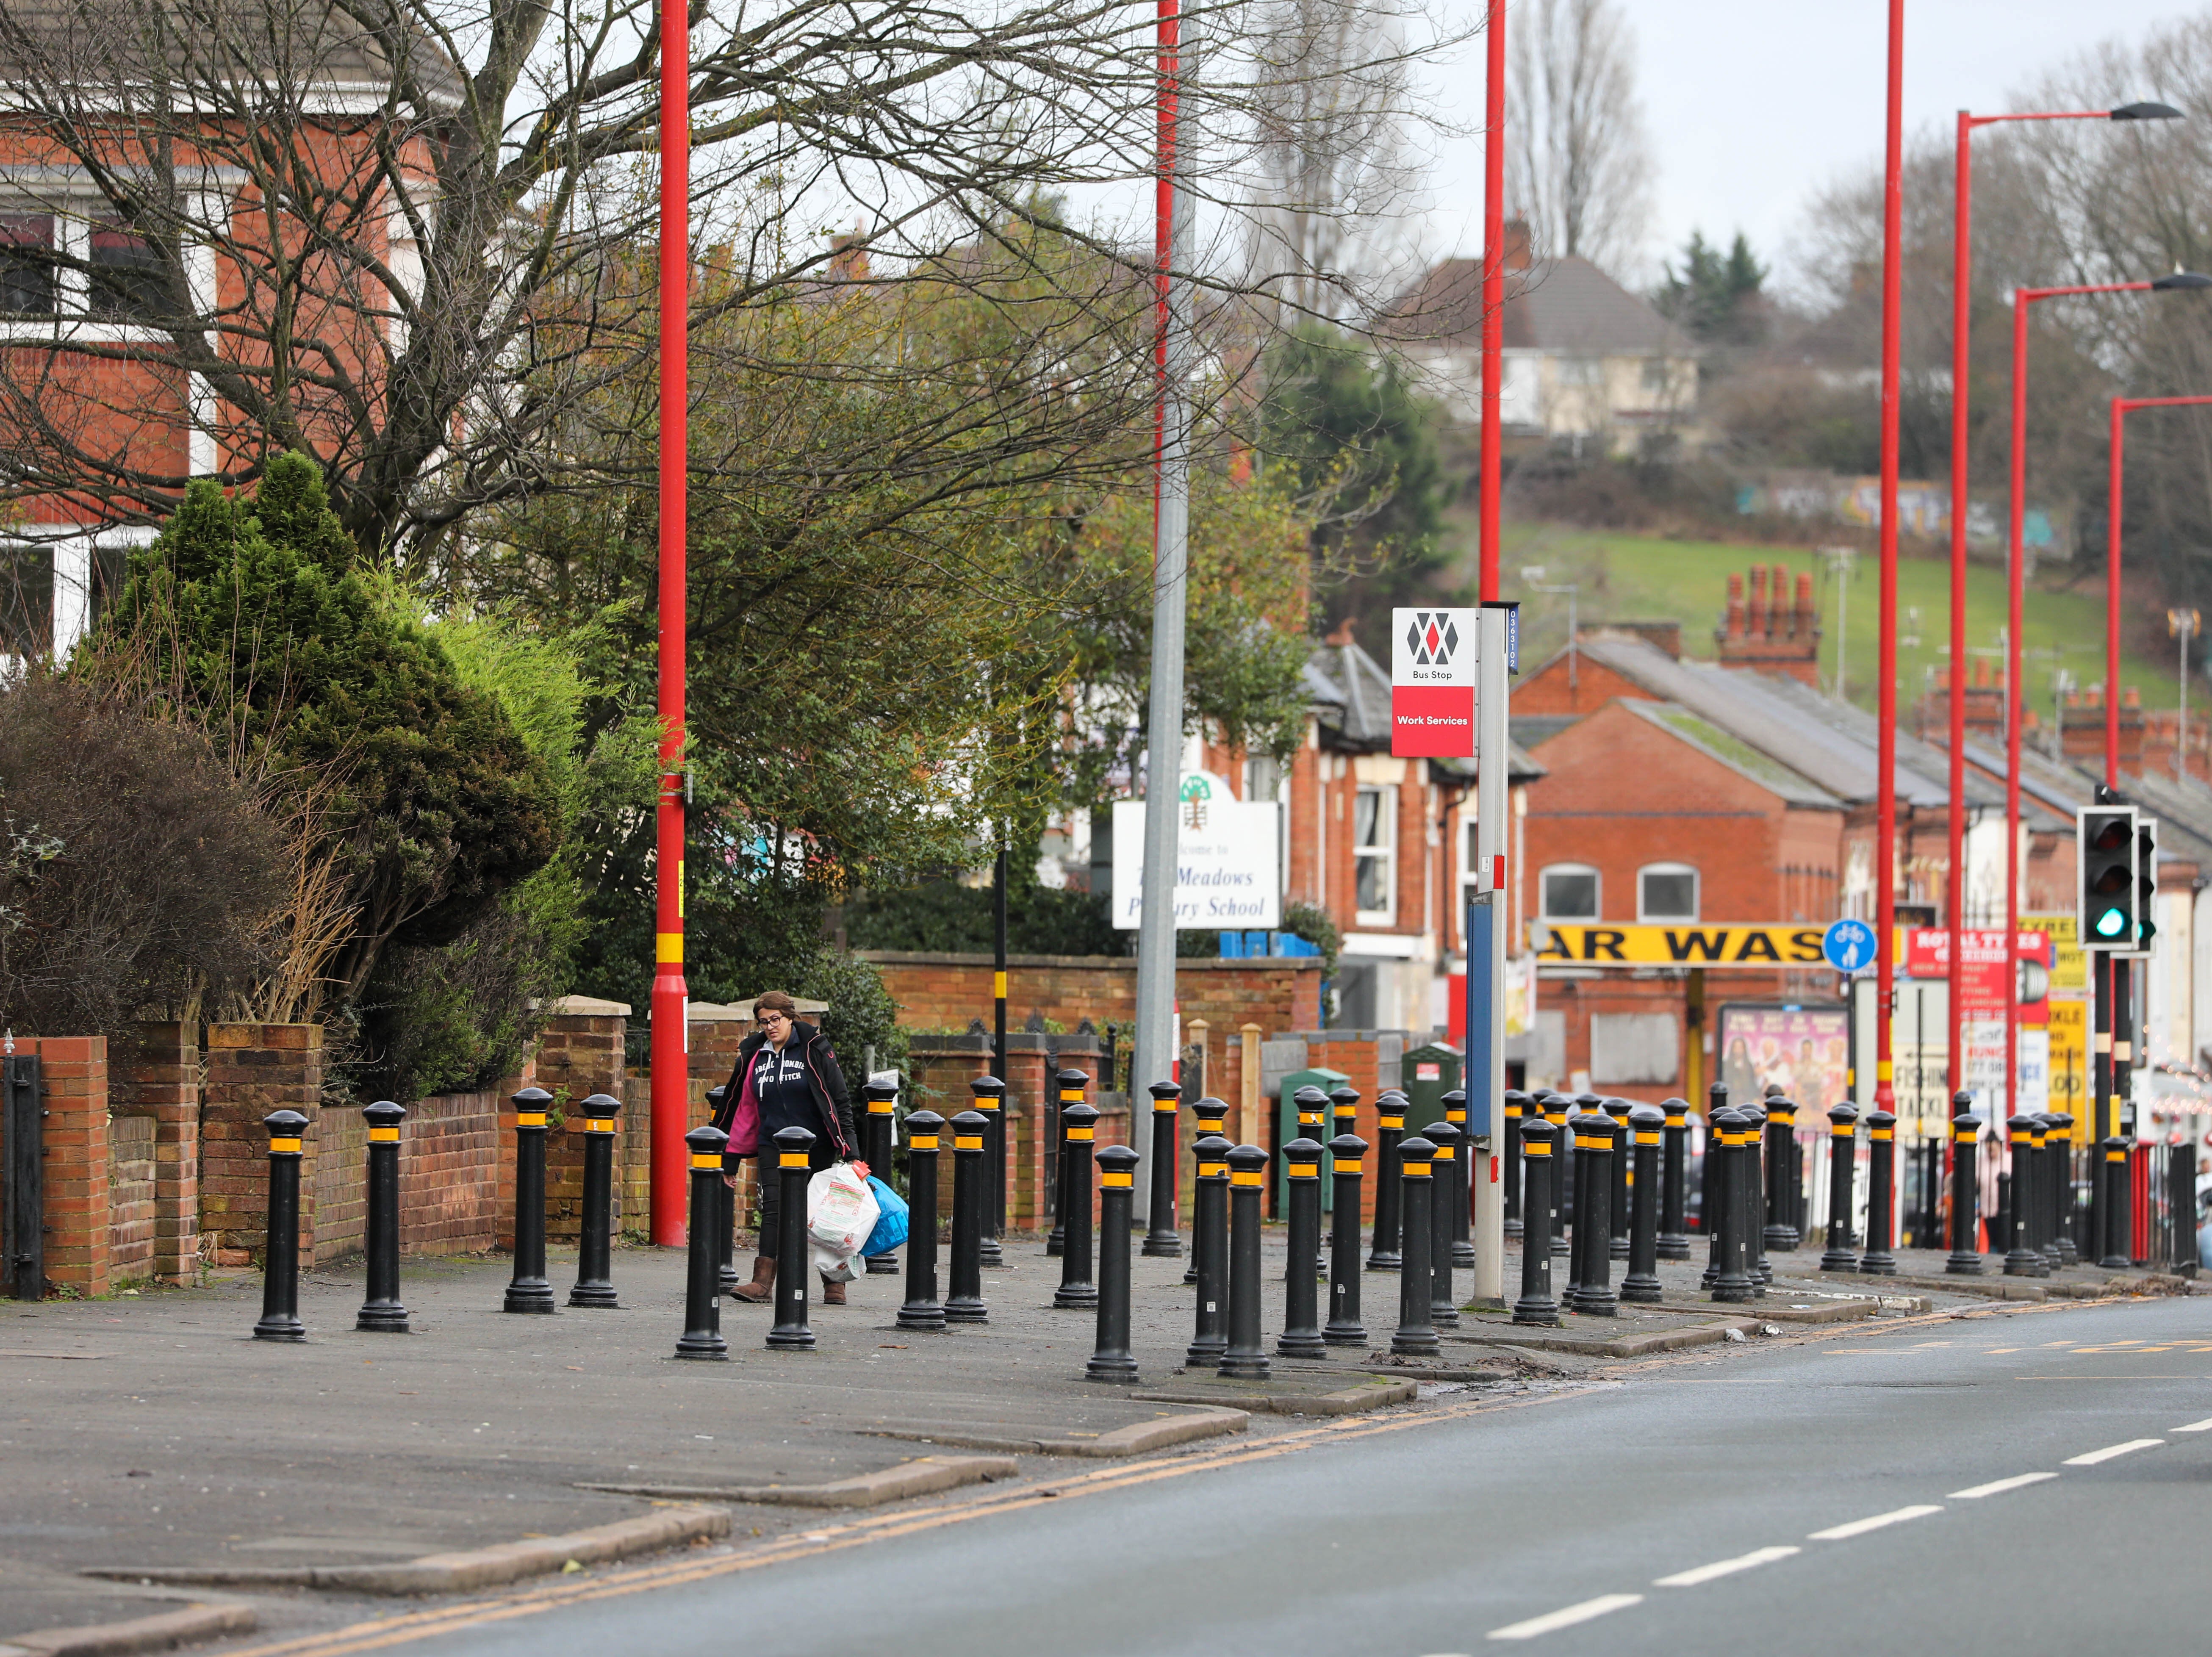 Residents have called the bollards ‘weird’ and ‘an unnecessary eyesore’